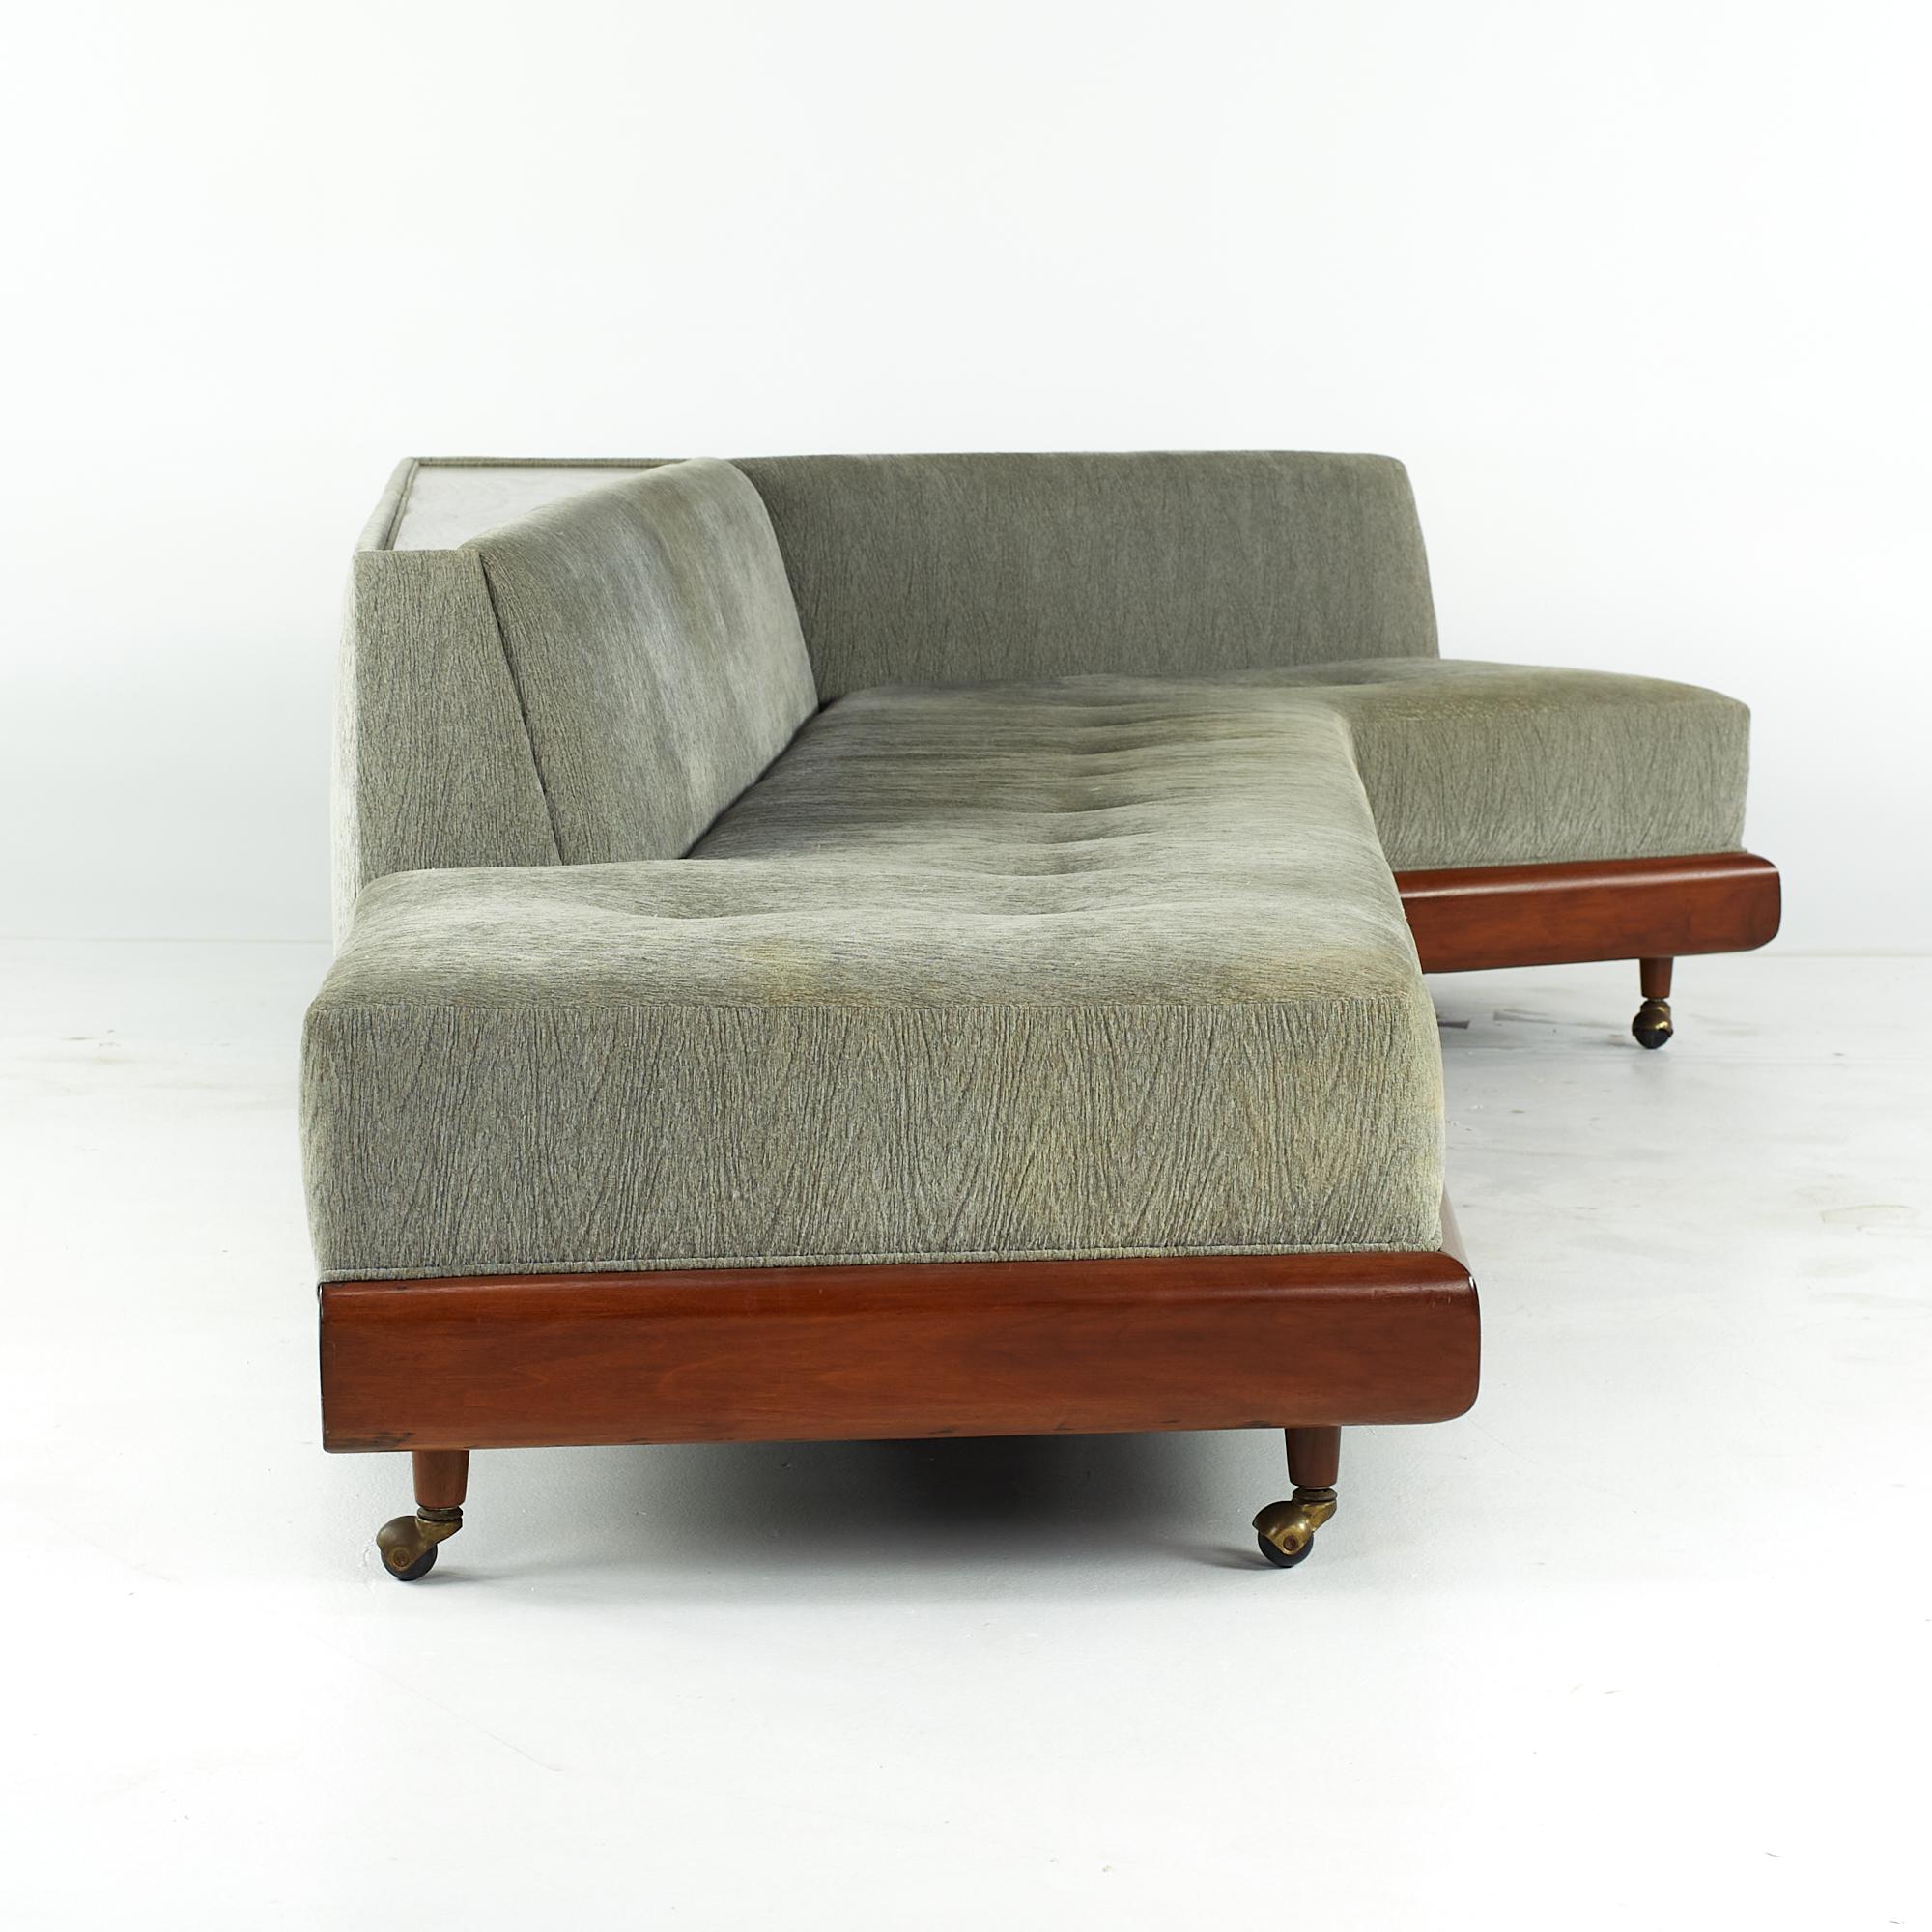 Late 20th Century Adrian Pearsall for Craft Associates Mid Century 2300-S Walnut Boomerang Sofa For Sale